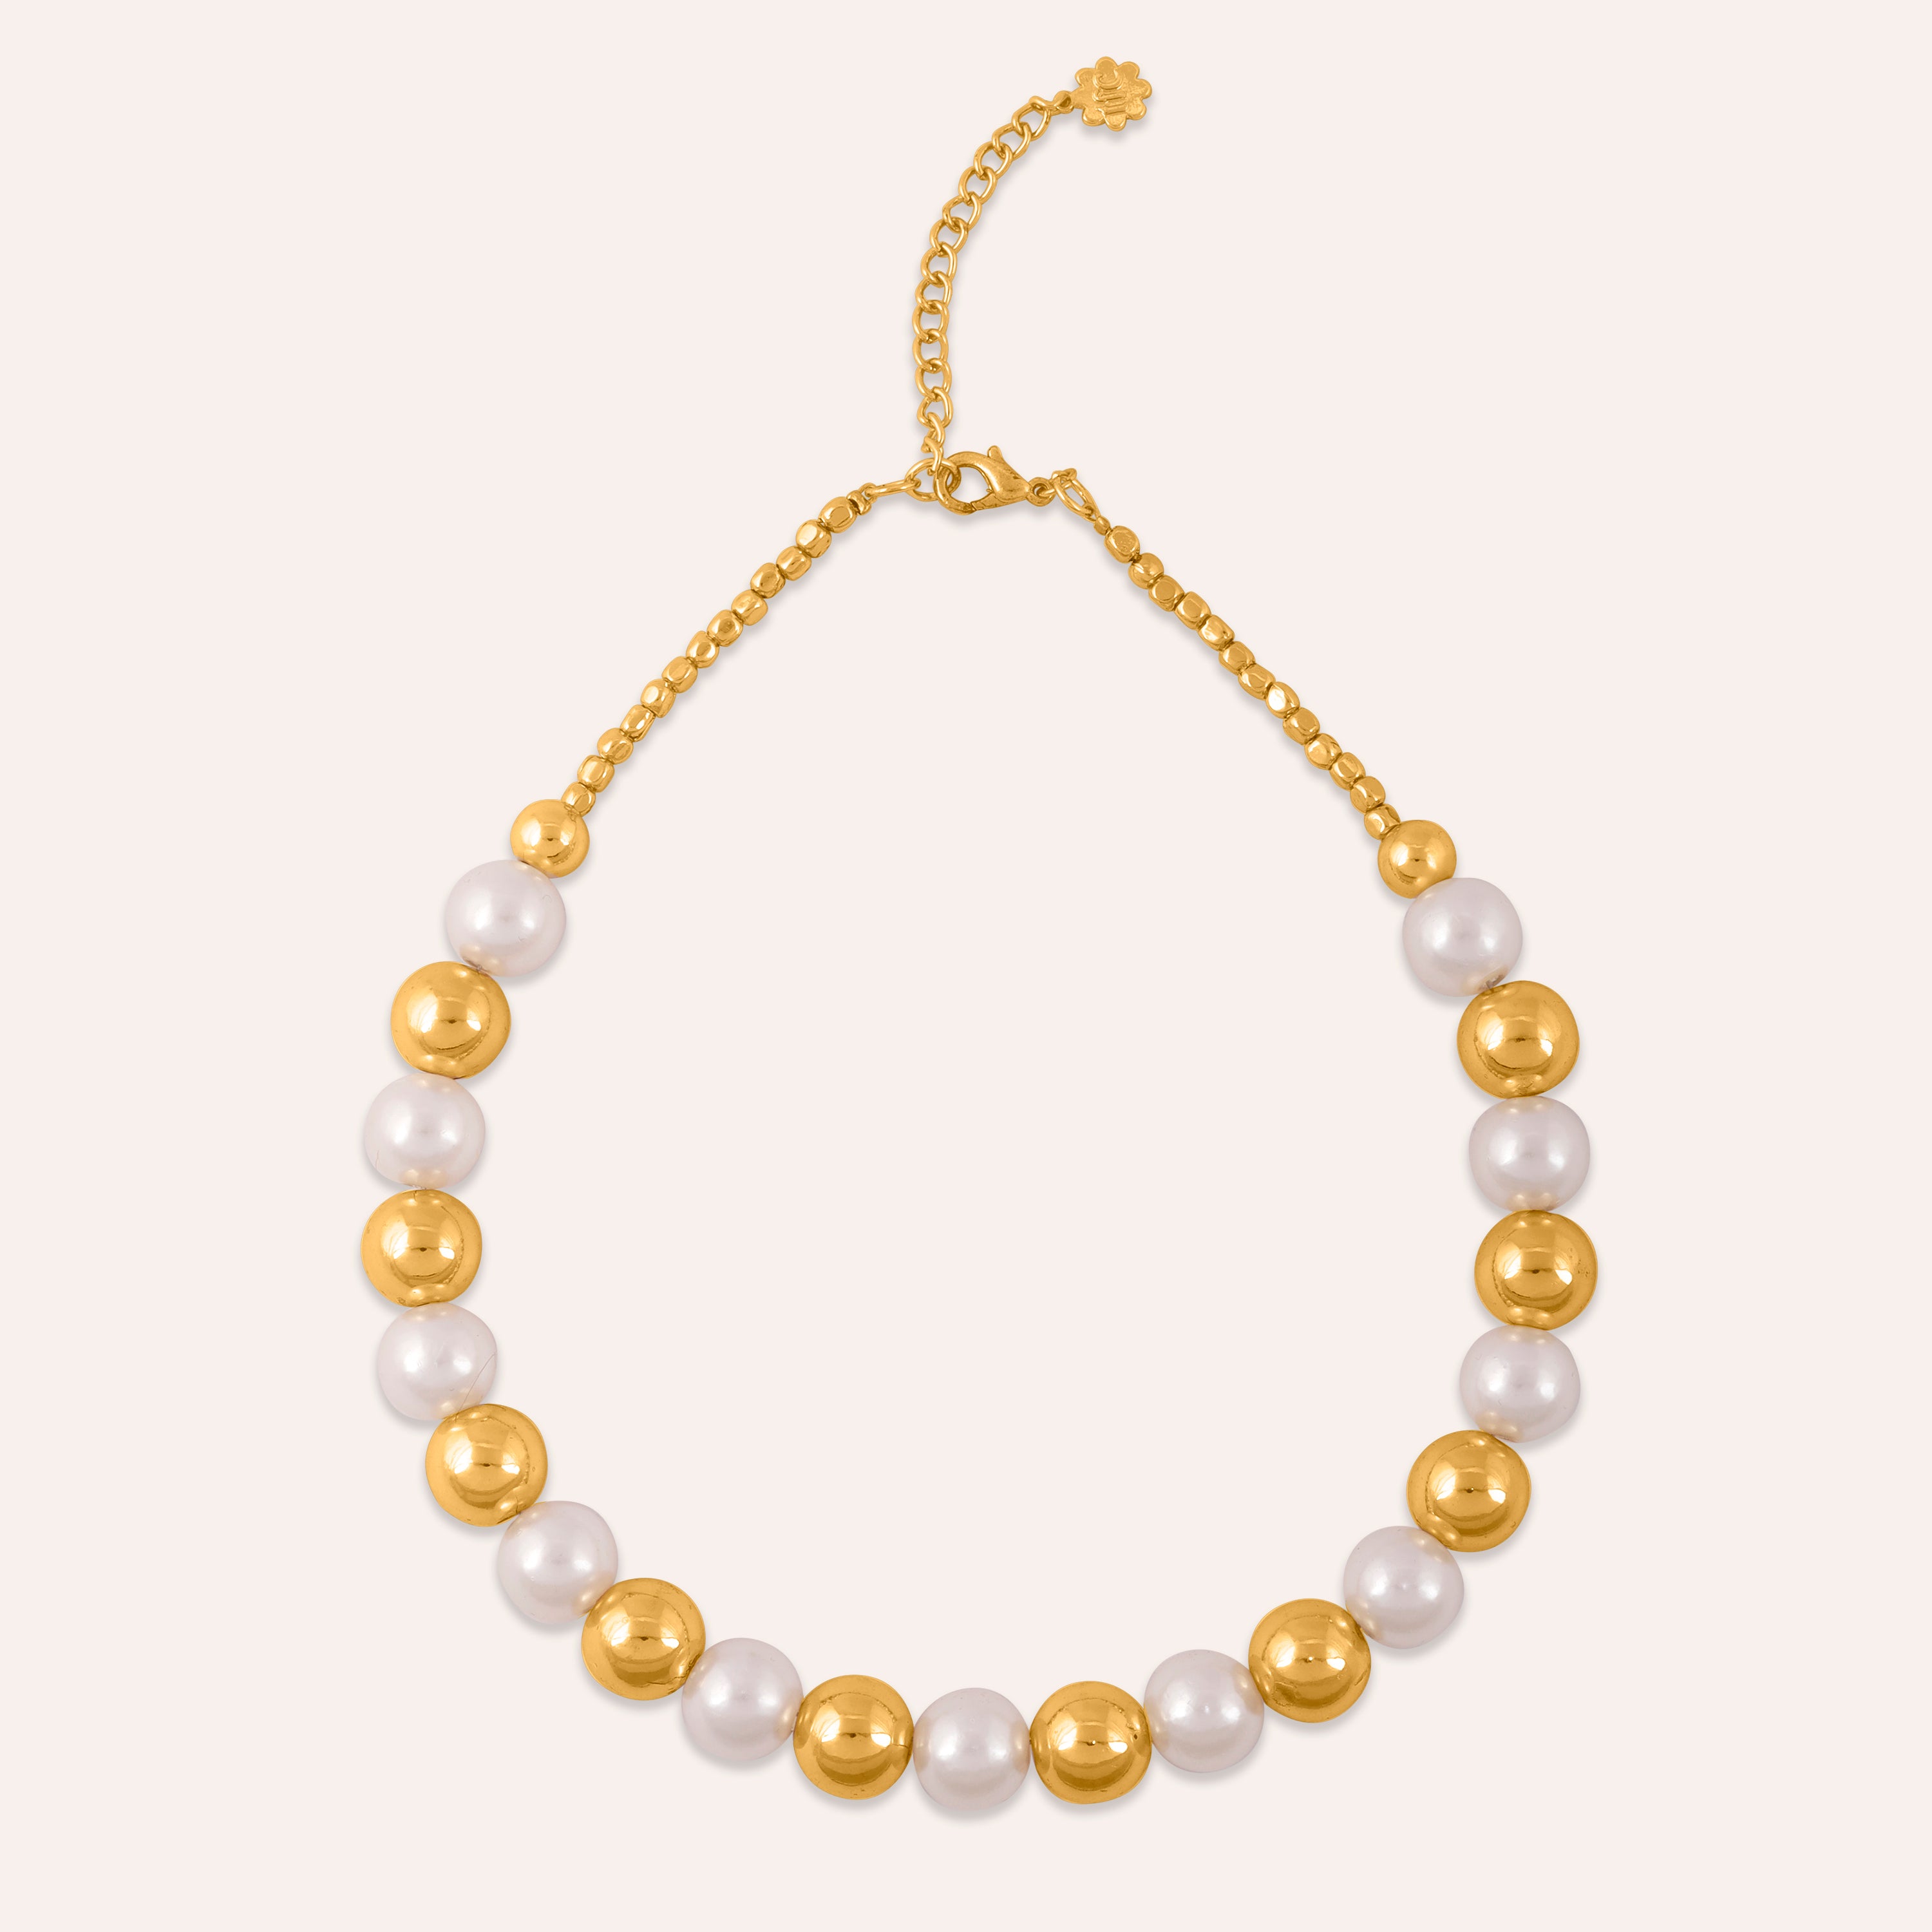 The Pearl Beads Necklace : 3 Fabulous Styling Ideas for This Chic Piece